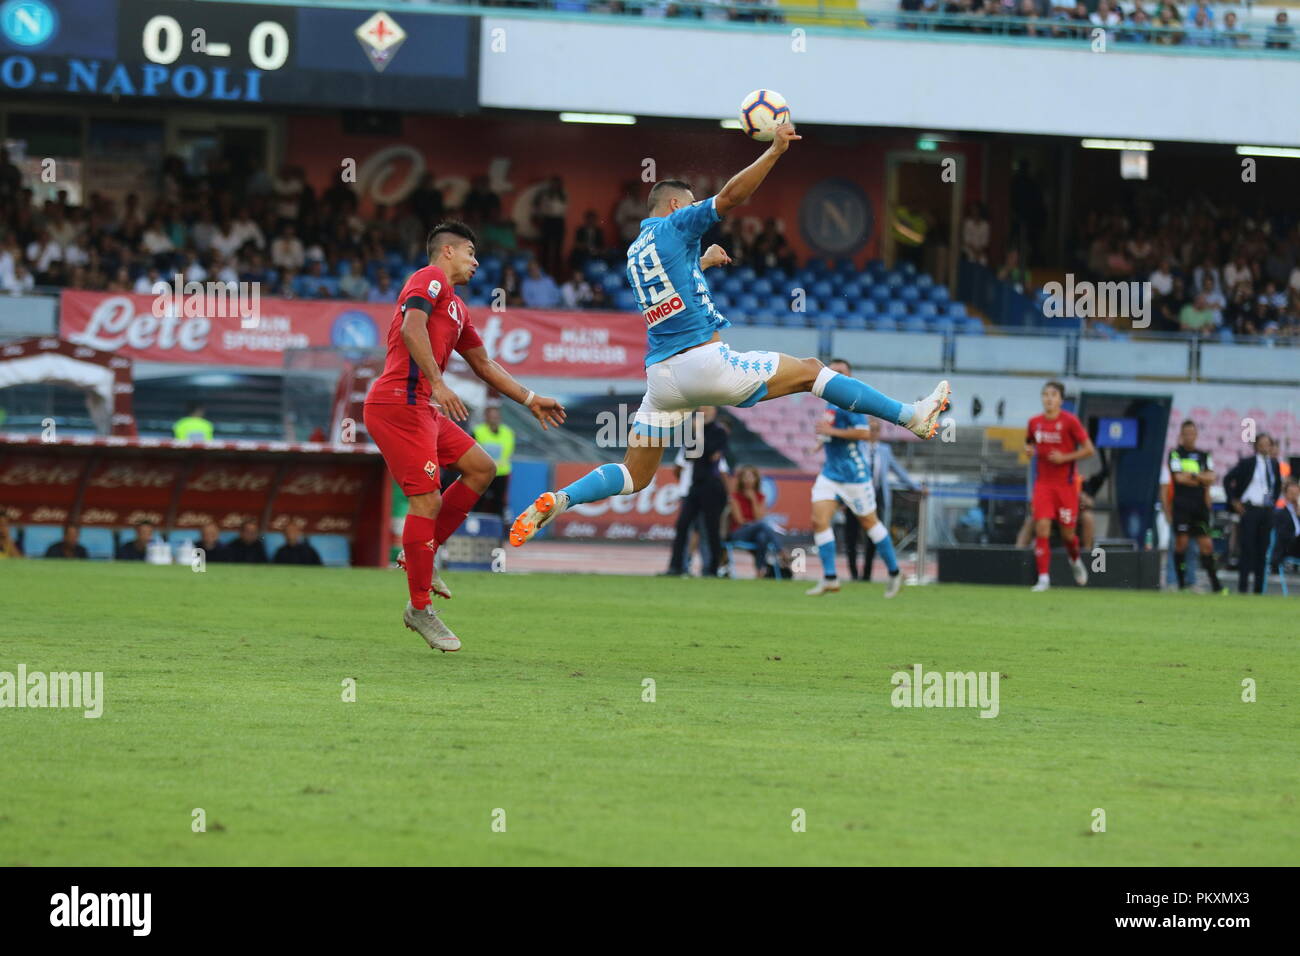 Naples, Italy. 15th September 2018. . in photo: the player of the napoli Maksimovic wins an aerial contrast against the Florentine simone.Stadium San Paolo Naples - 09/15/2018 - Italy.final result SSC Napoli 1 AC Fiorentina 0. Credit: Fabio Sasso/ZUMA Wire/Alamy Live News Stock Photo